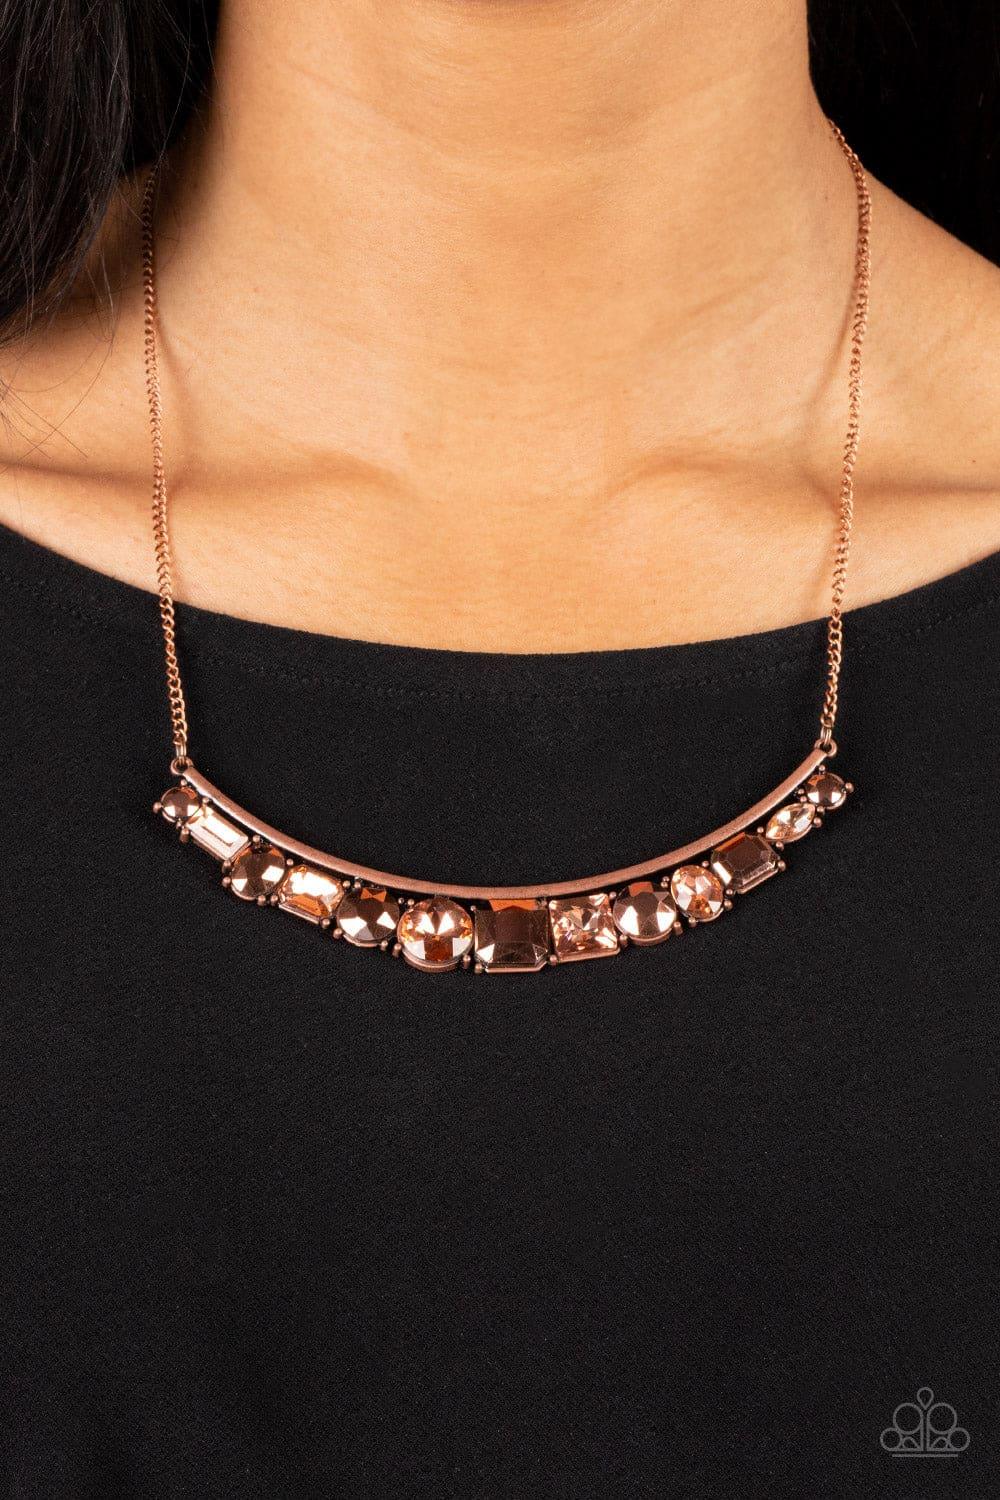 Paparazzi Accessories - The Only Smoke-show In Town - Copper Necklace - Bling by JessieK